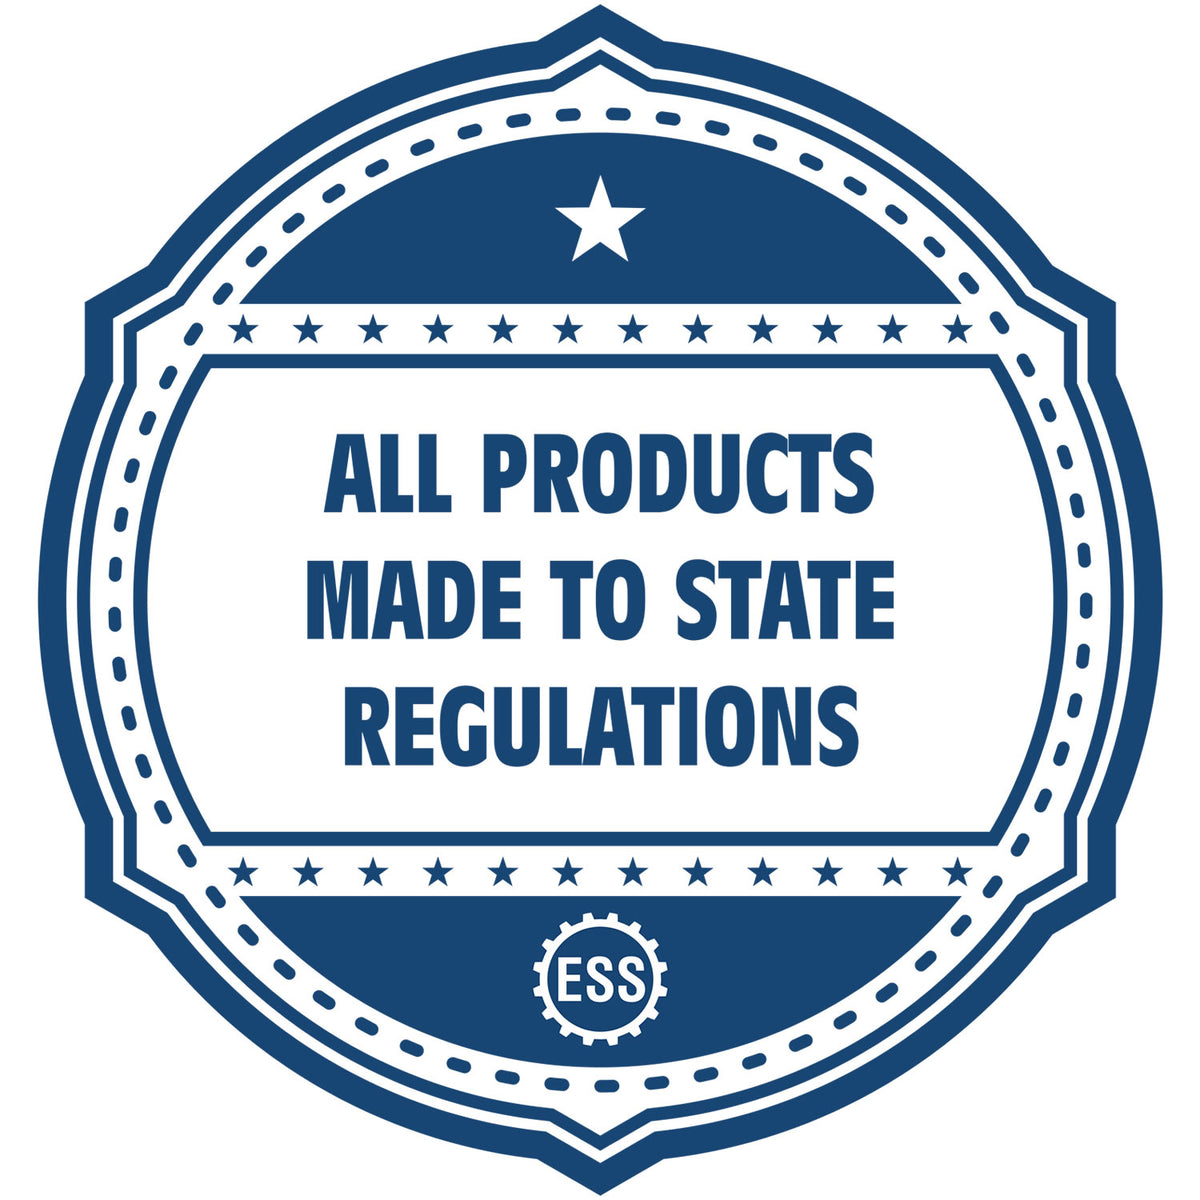 An icon or badge element for the State of New York Architectural Seal Embosser showing that this product is made in compliance with state regulations.